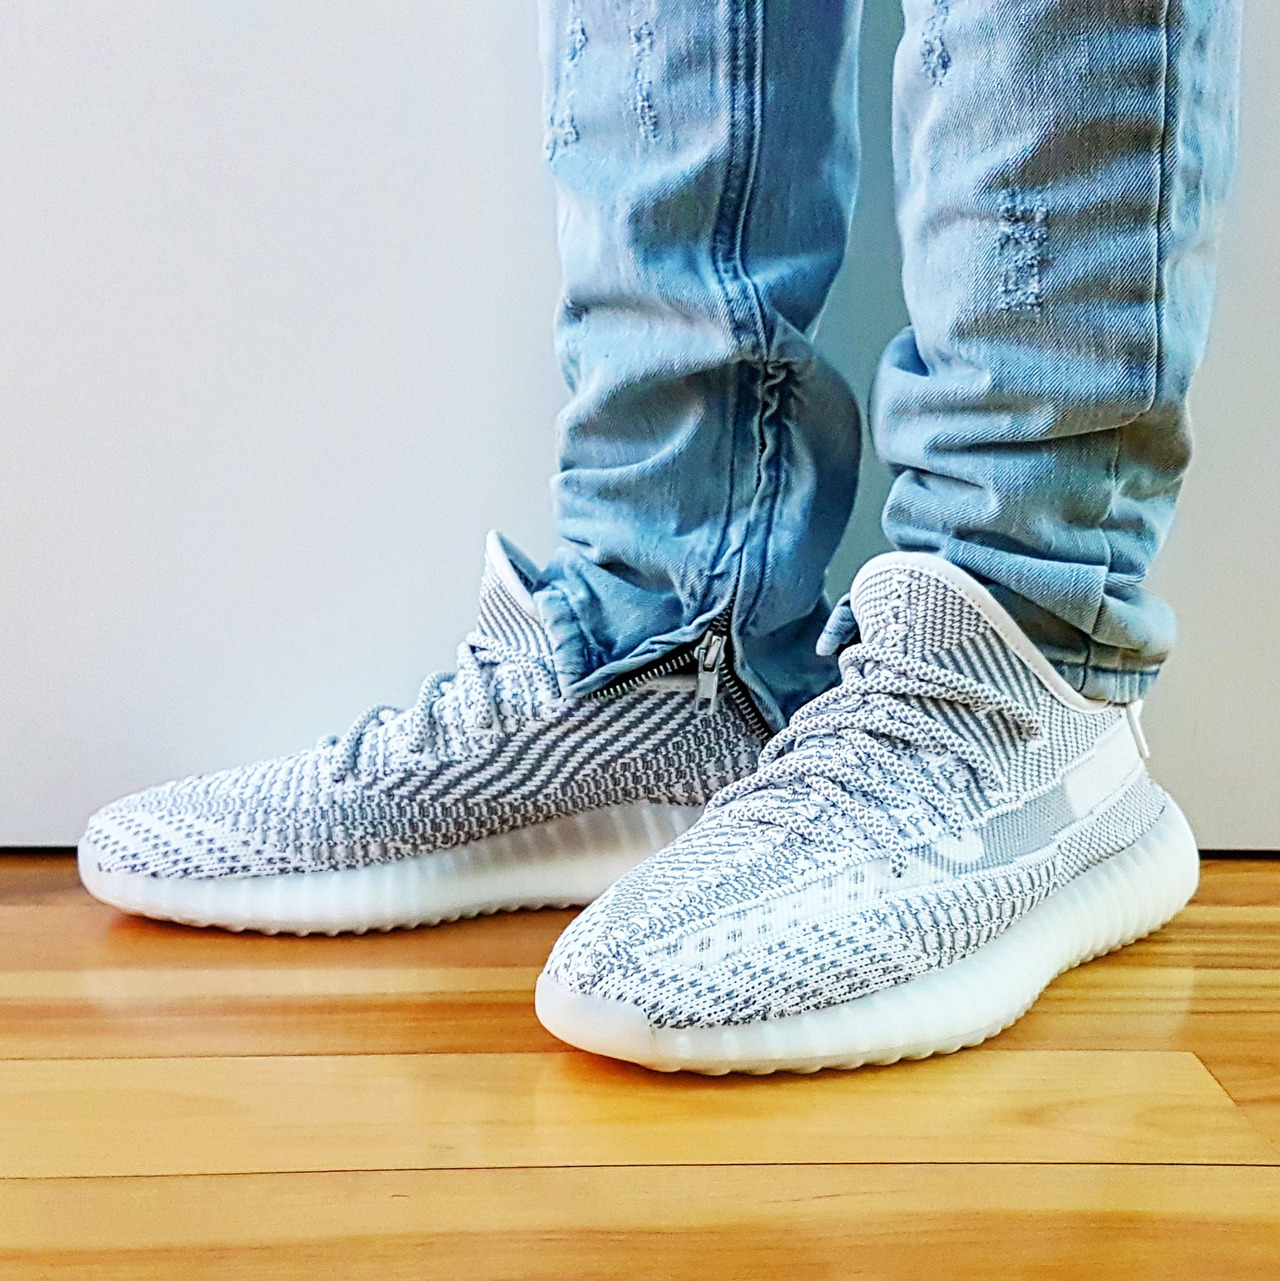 yeezy 350 boost v2 static non reflective